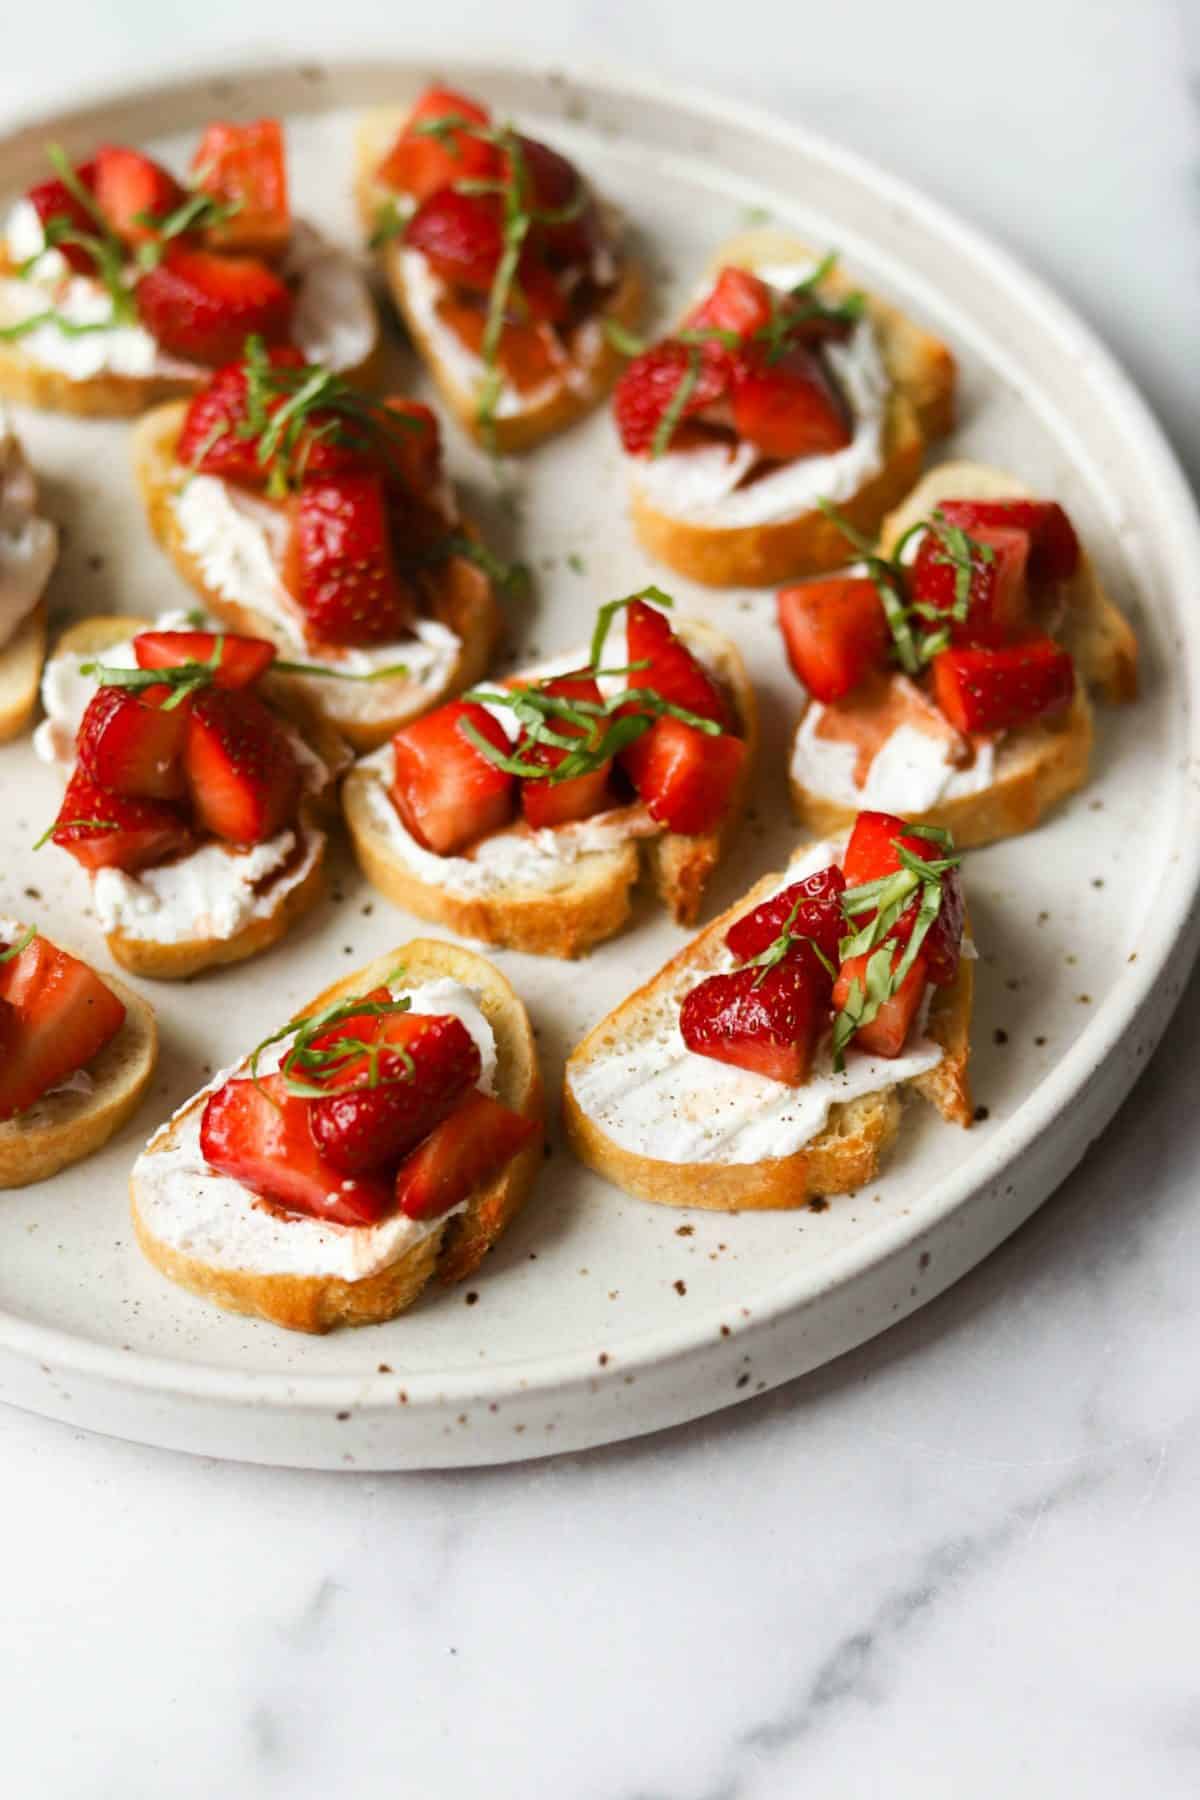 strawberry and basil bruschettas arranged on a white plate.